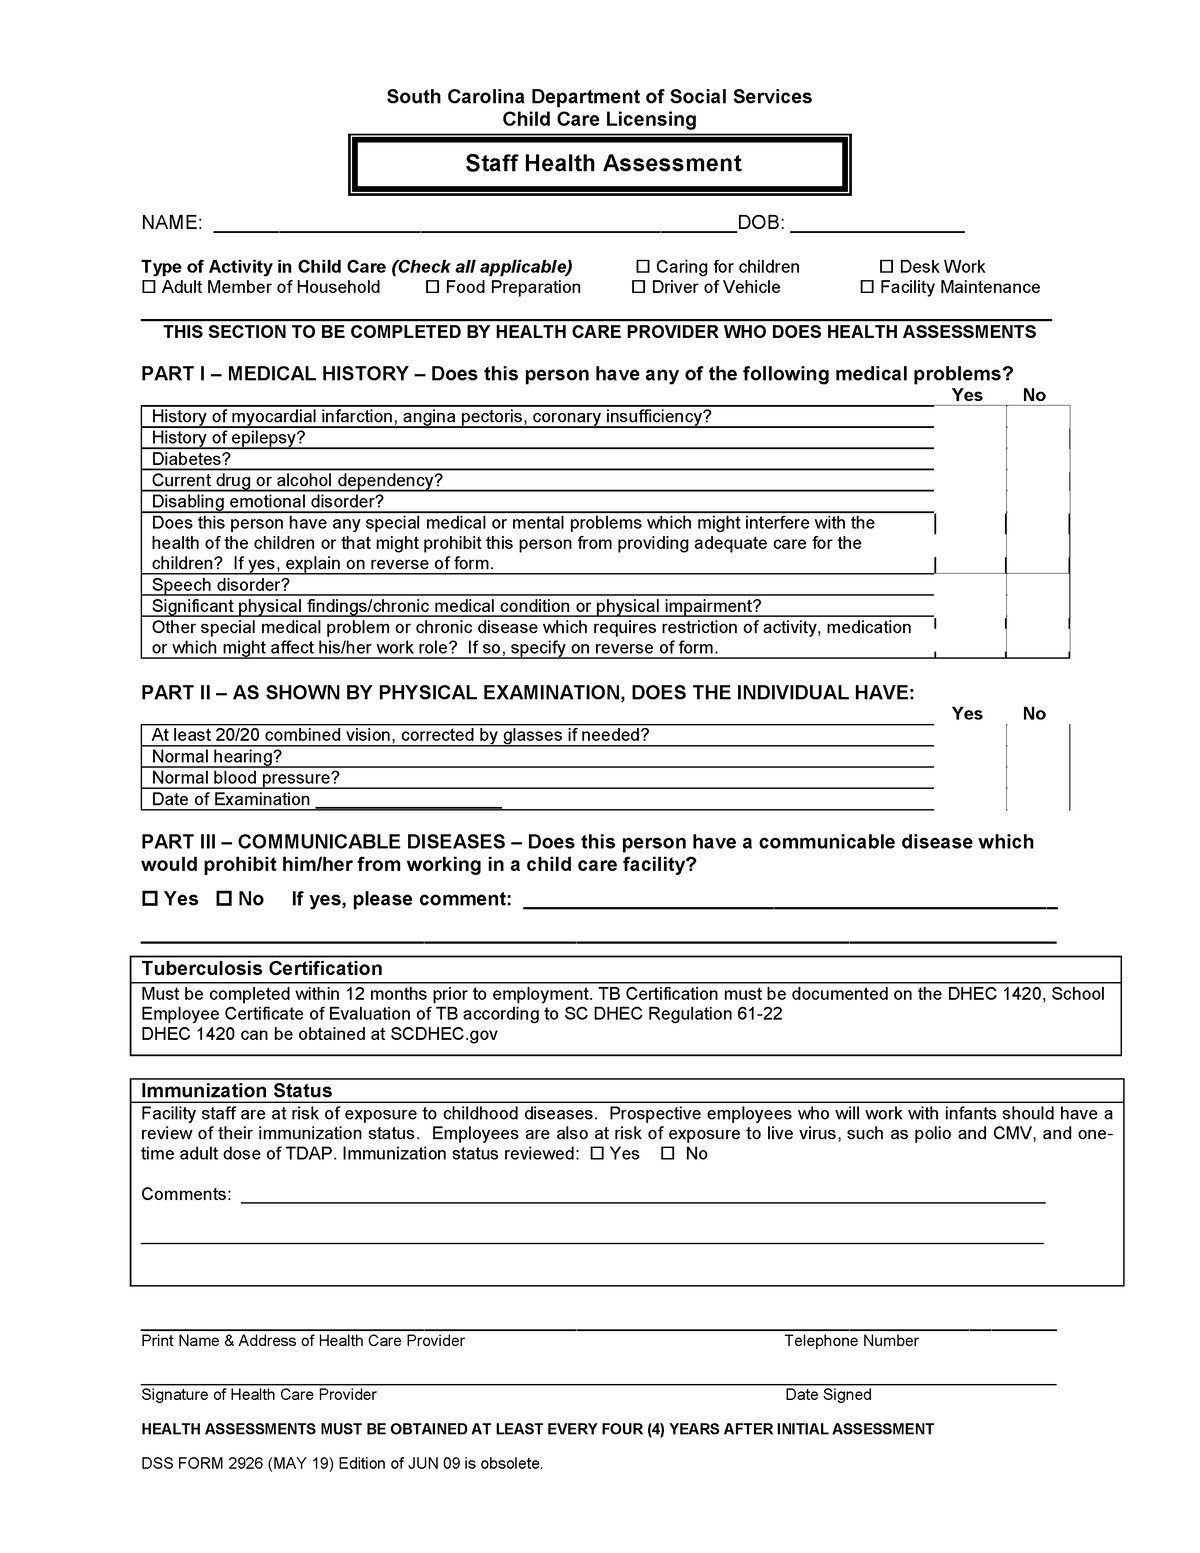 Dss Form 2926 Staff Health Assessment May 19 South Carolina Department Of Social Services 1917